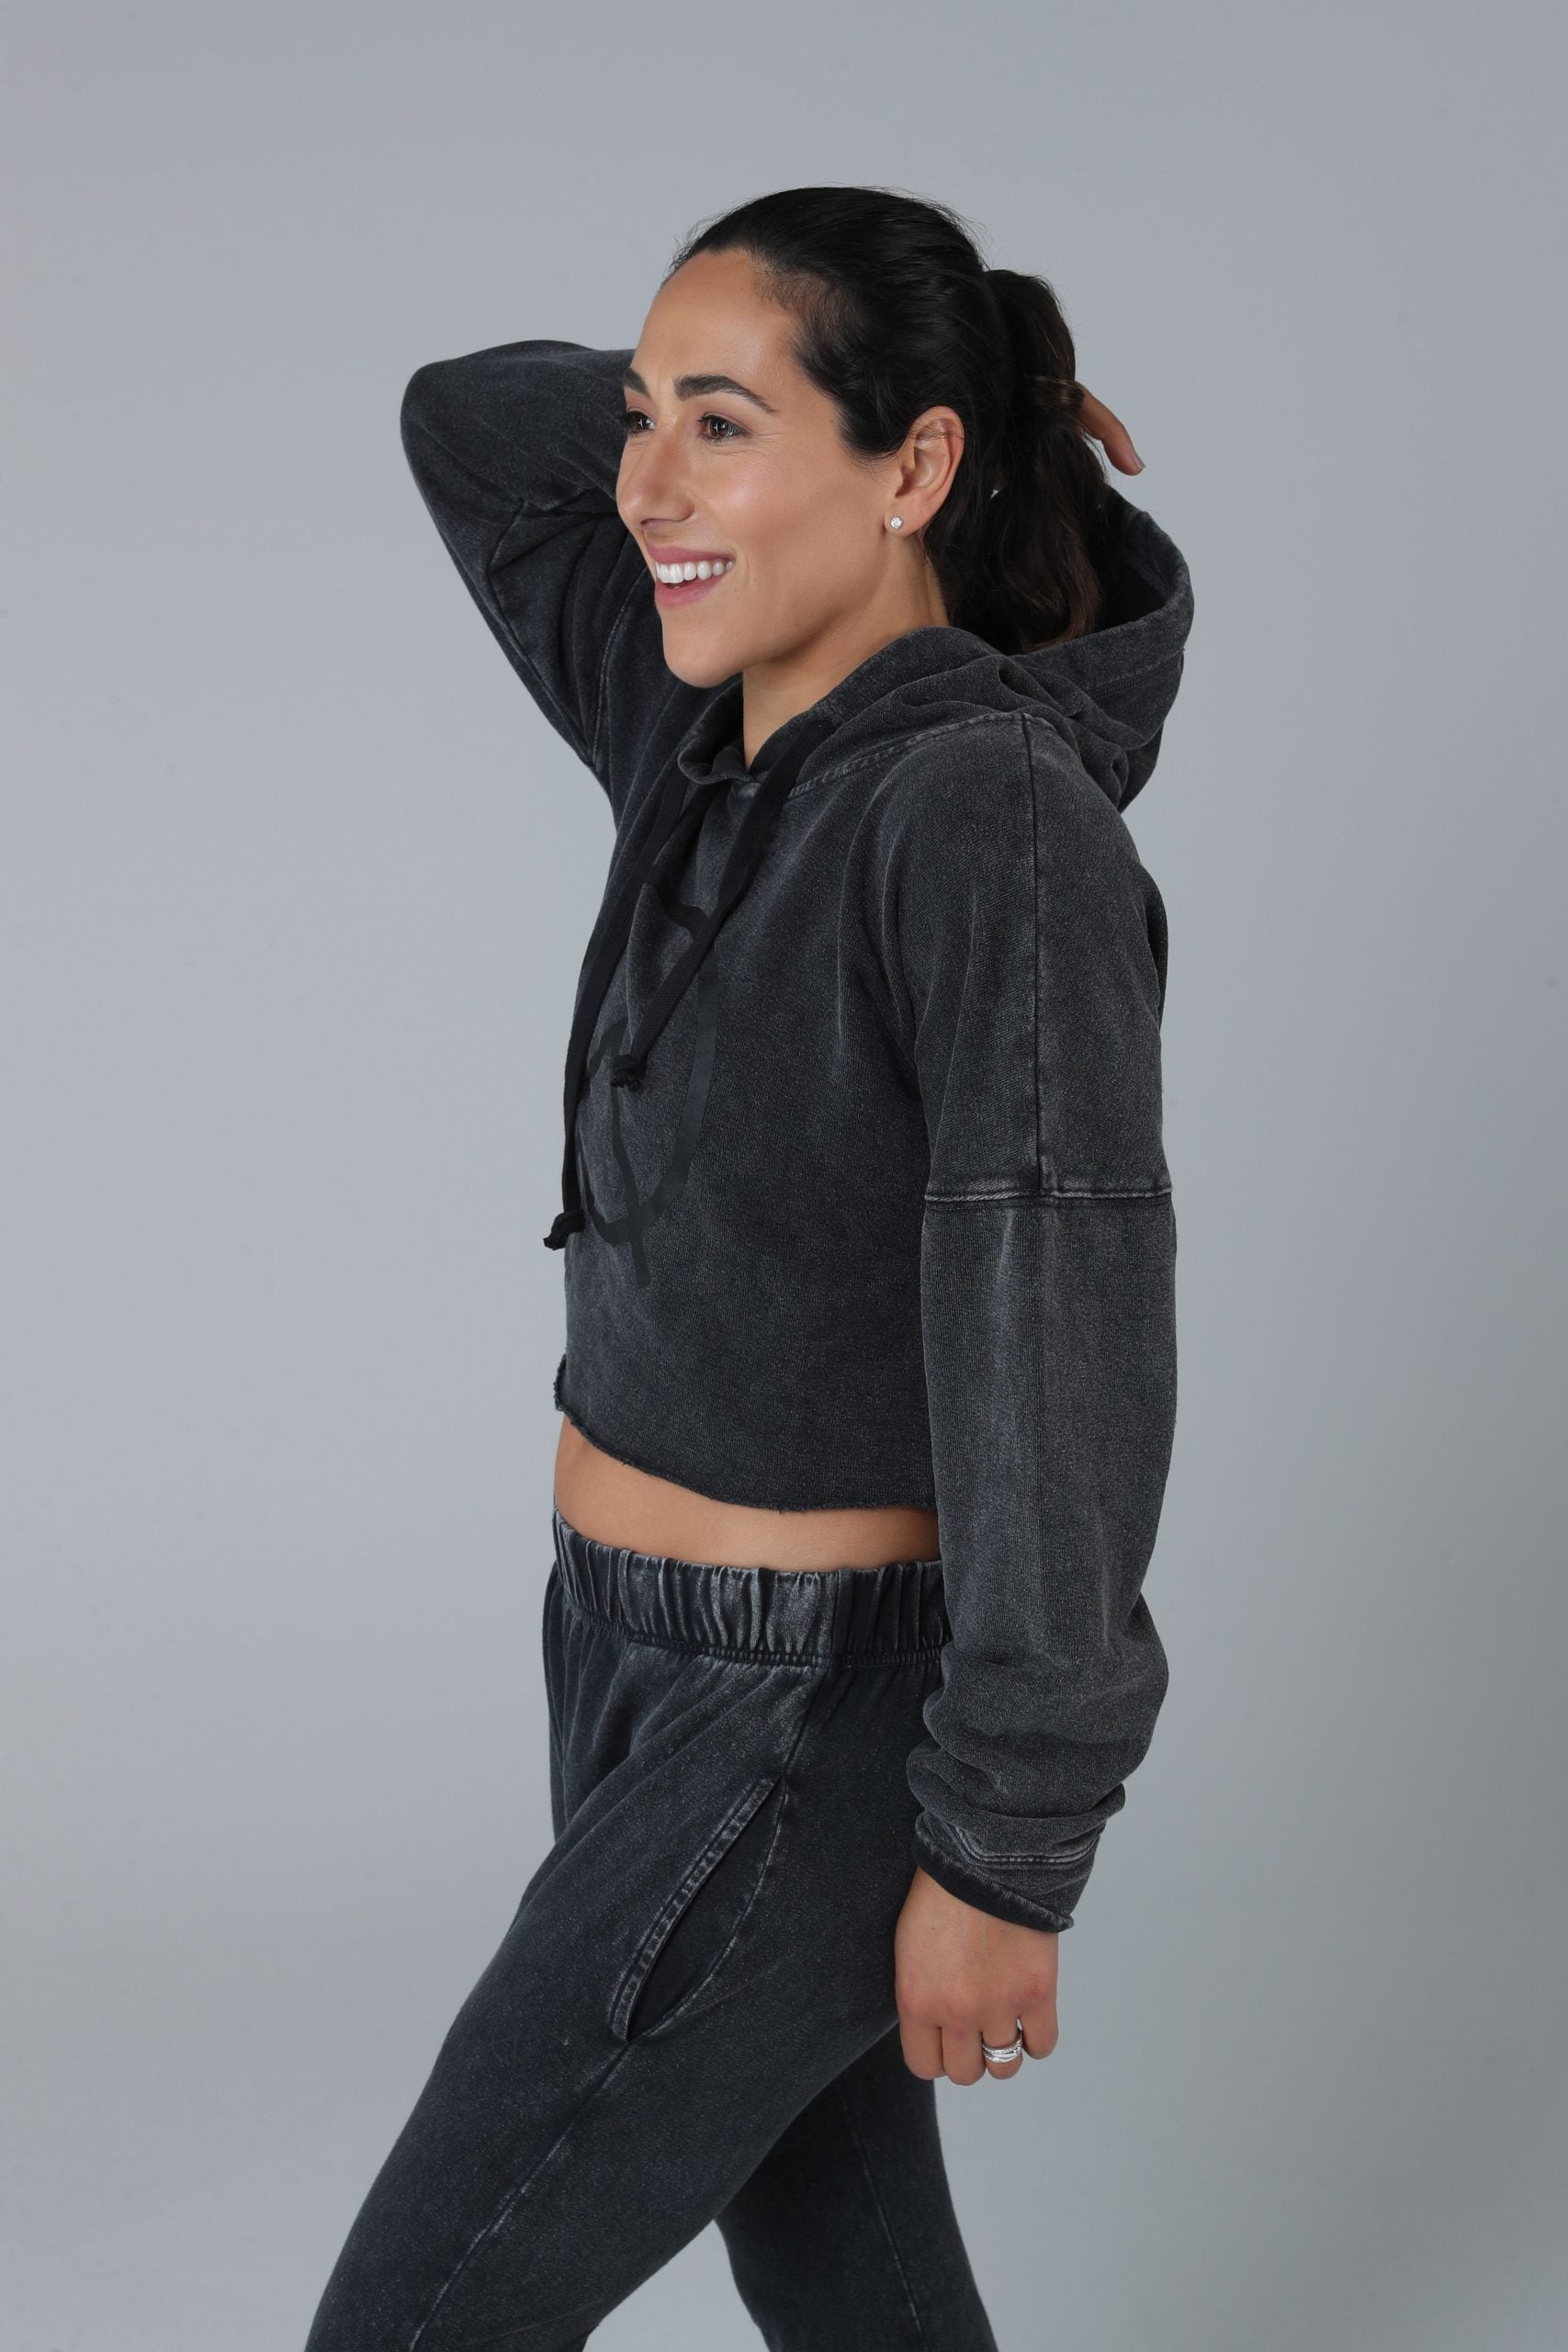 Stay cozy in style with our cropped hemp hoodie. Sustainable, chic, and irresistibly comfortable. Shop now!